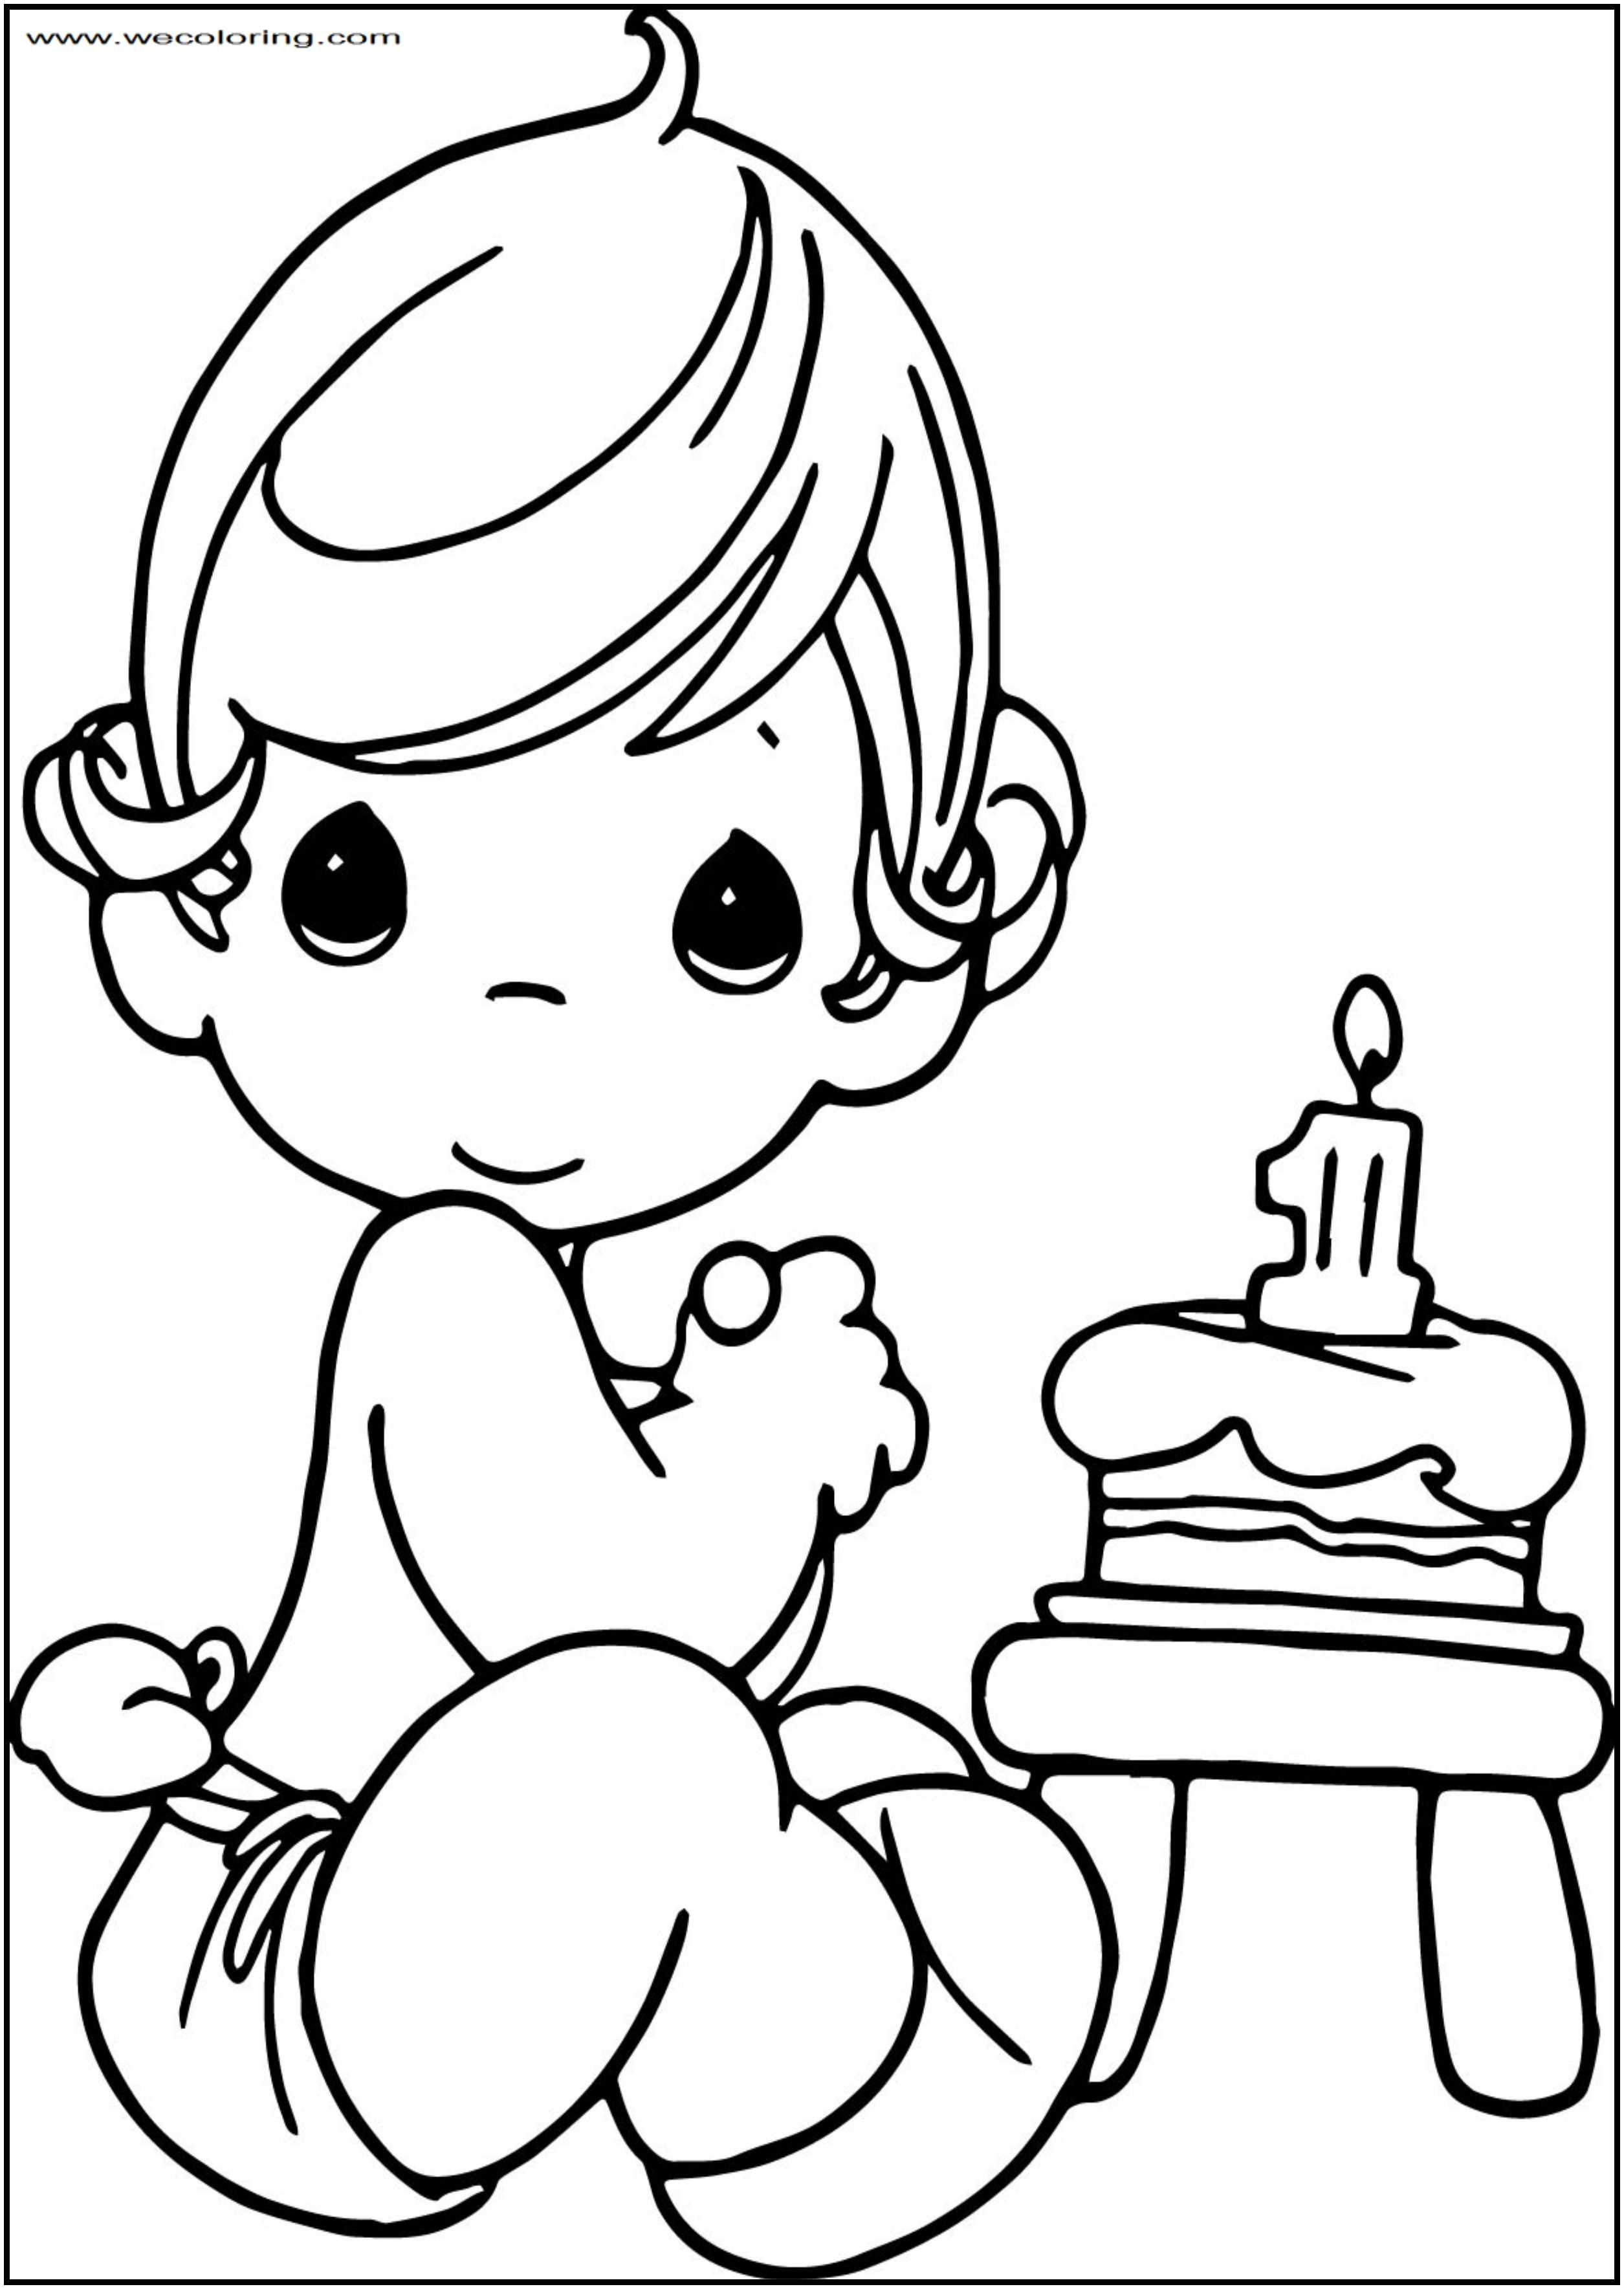 Precious Moments Baby Coloring Pages Precious Moments Happy Birthday Free Printable Coloring Page